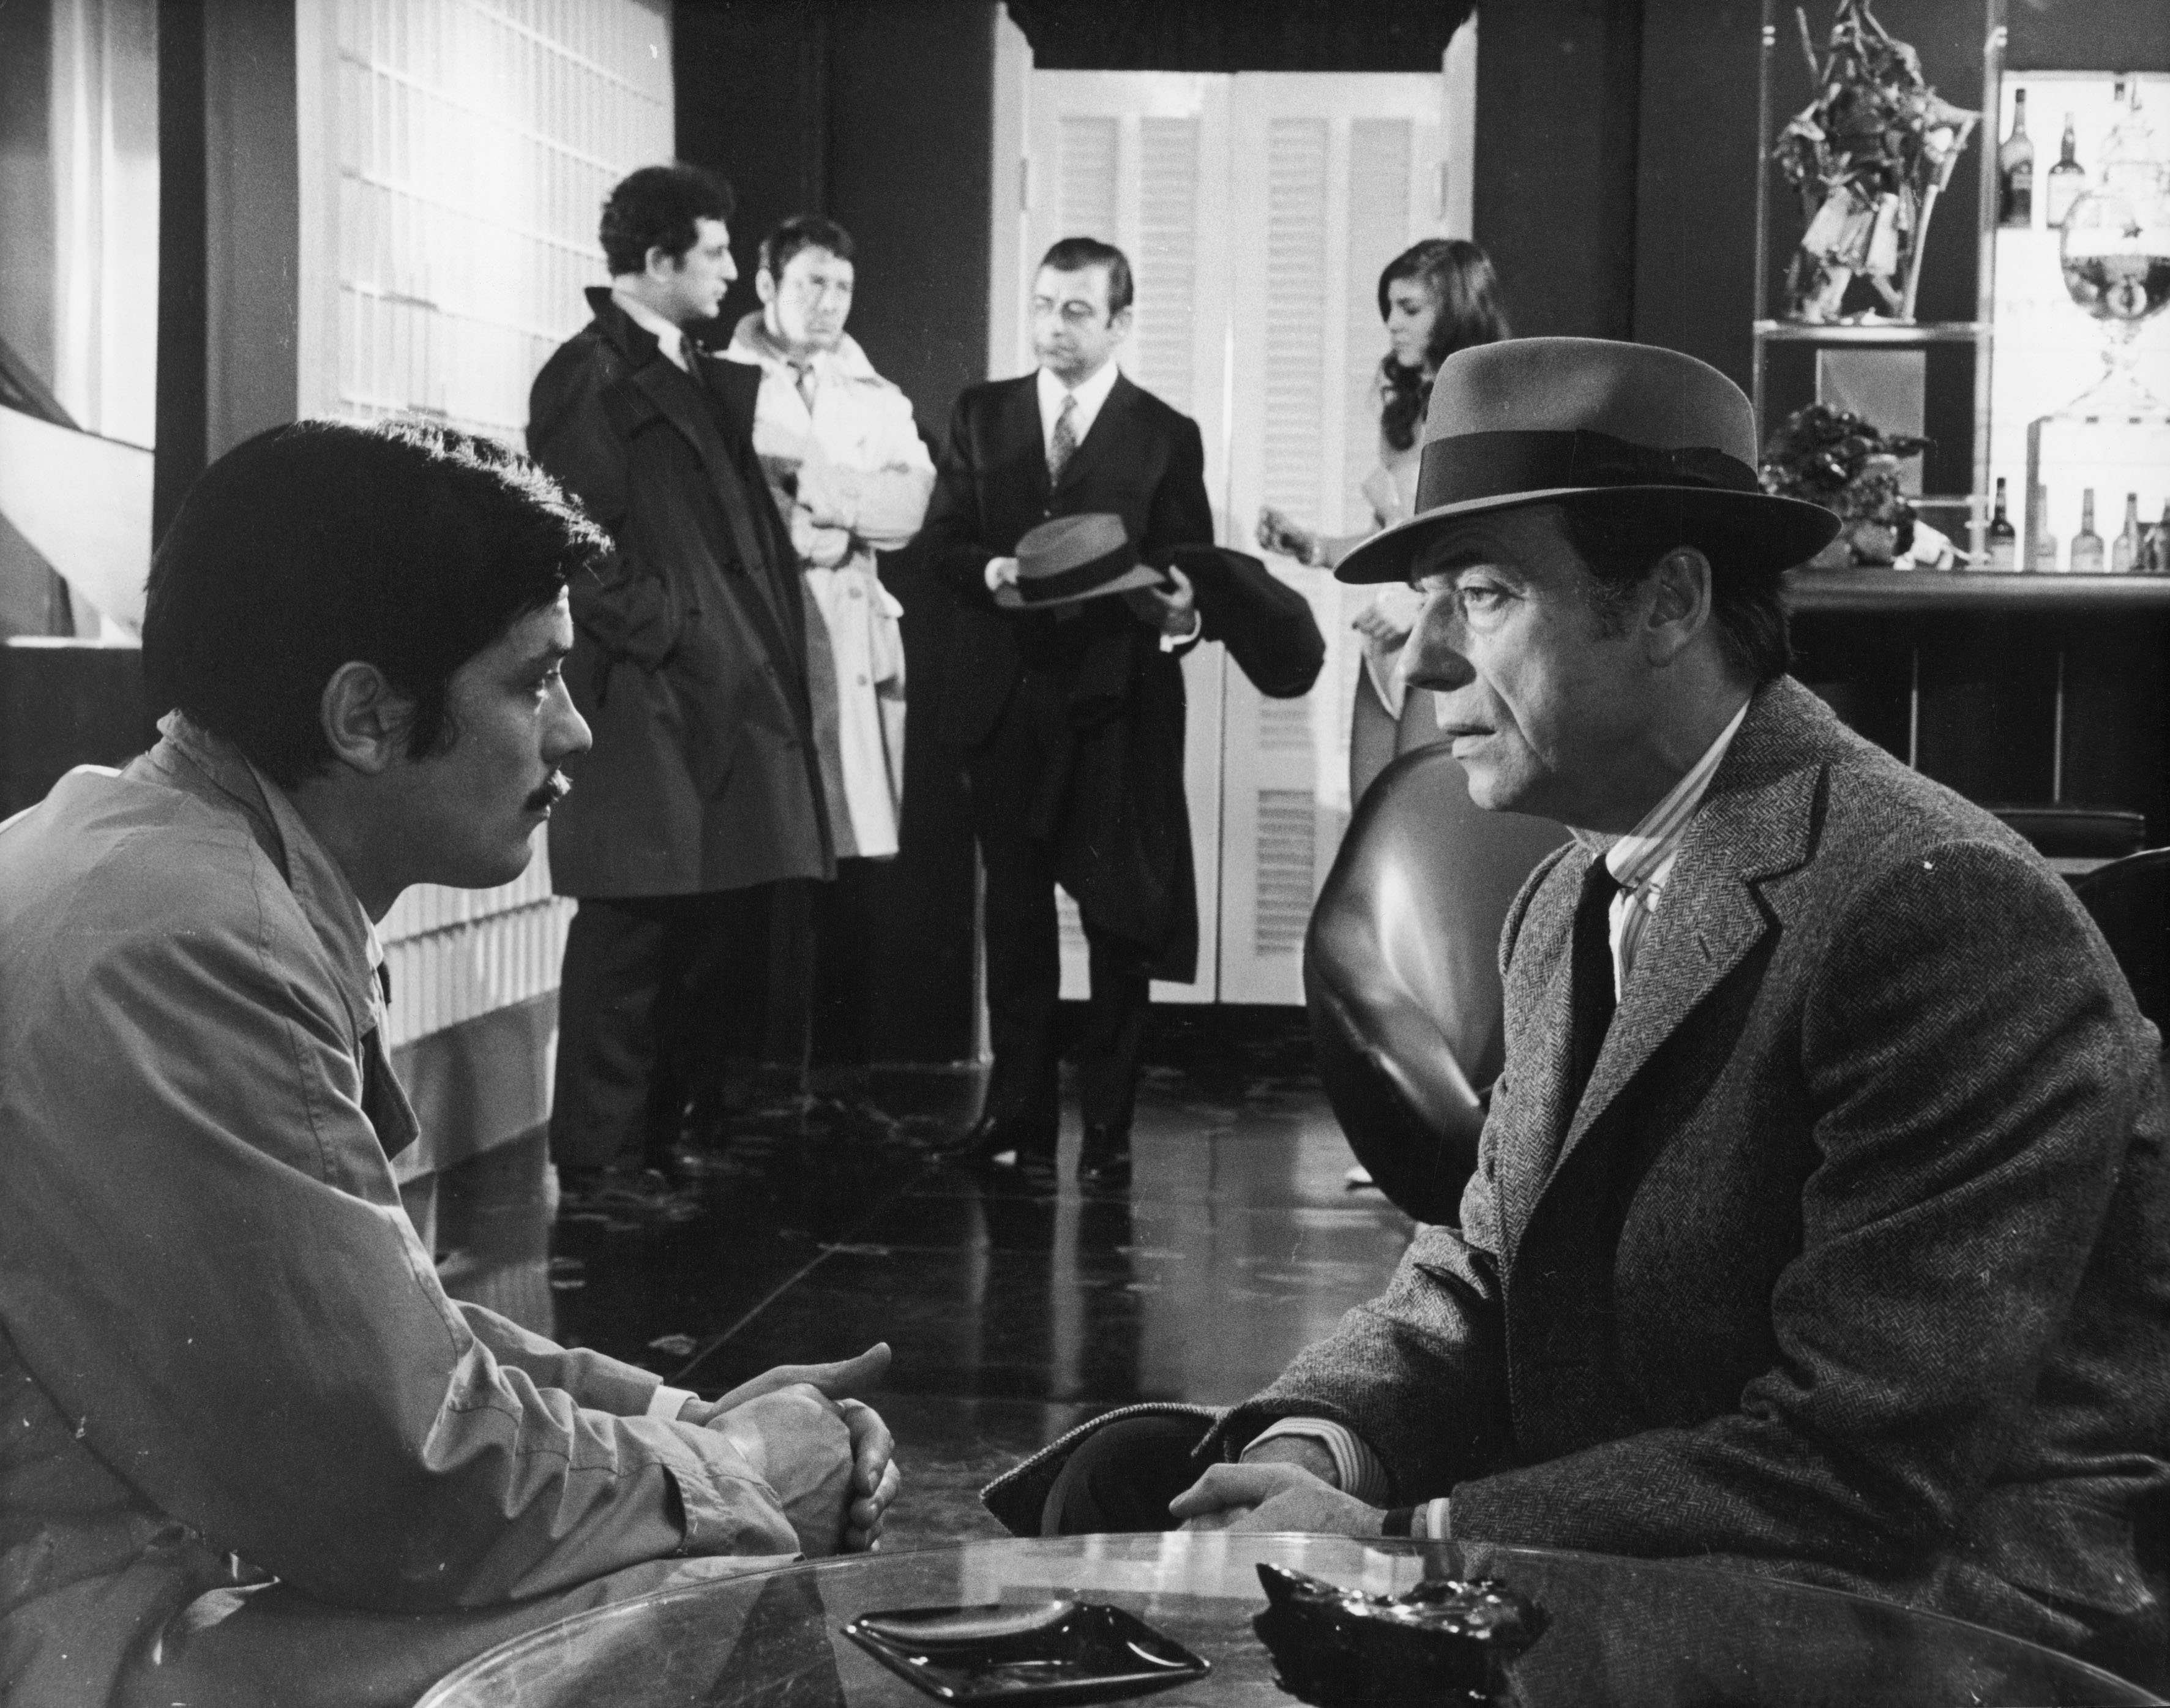 Still of Alain Delon and Yves Montand in Le cercle rouge (1970)